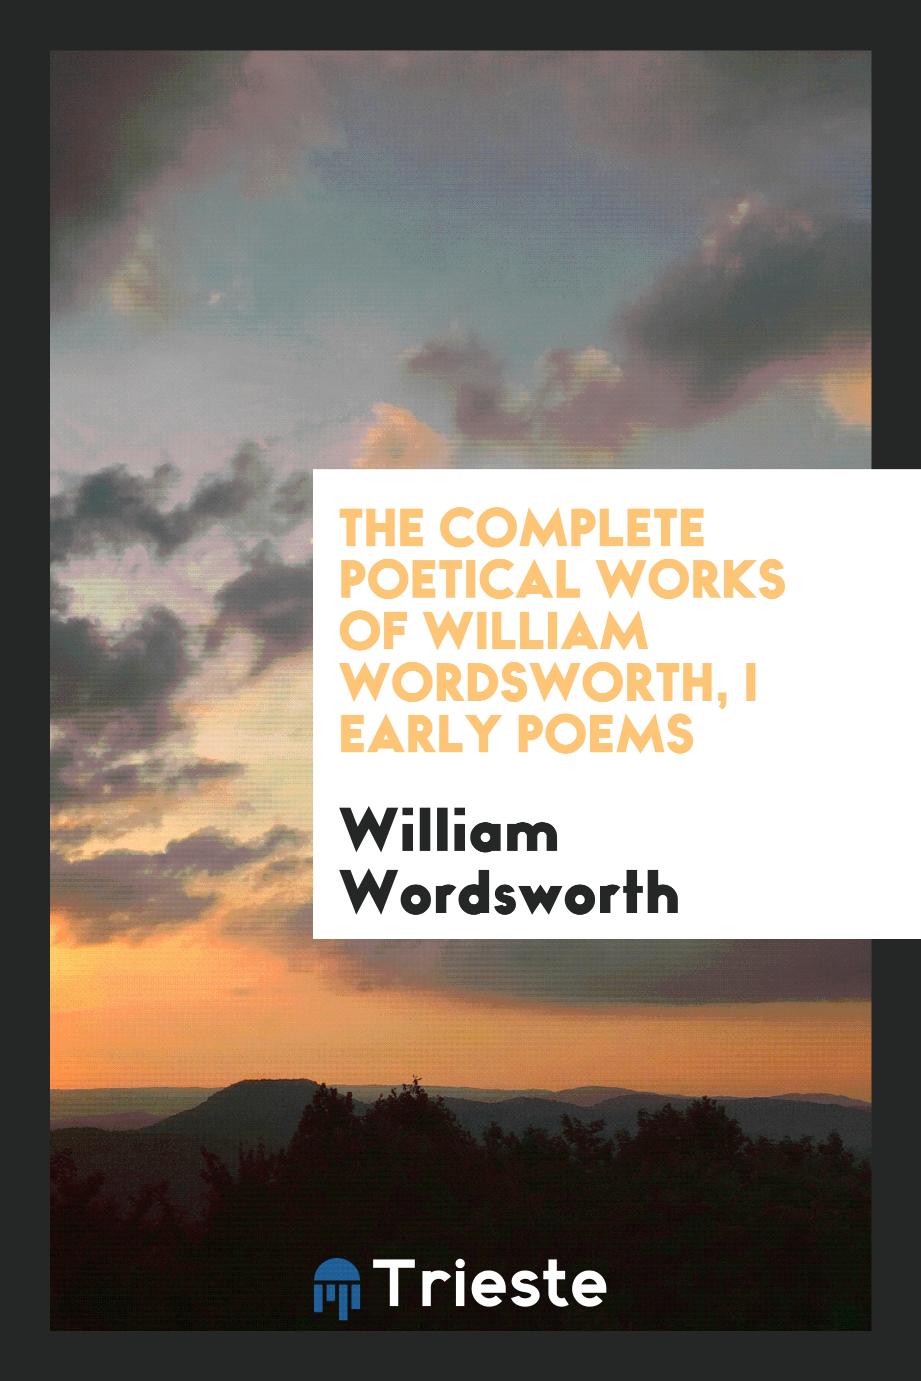 The complete poetical works of William Wordsworth, I early poems